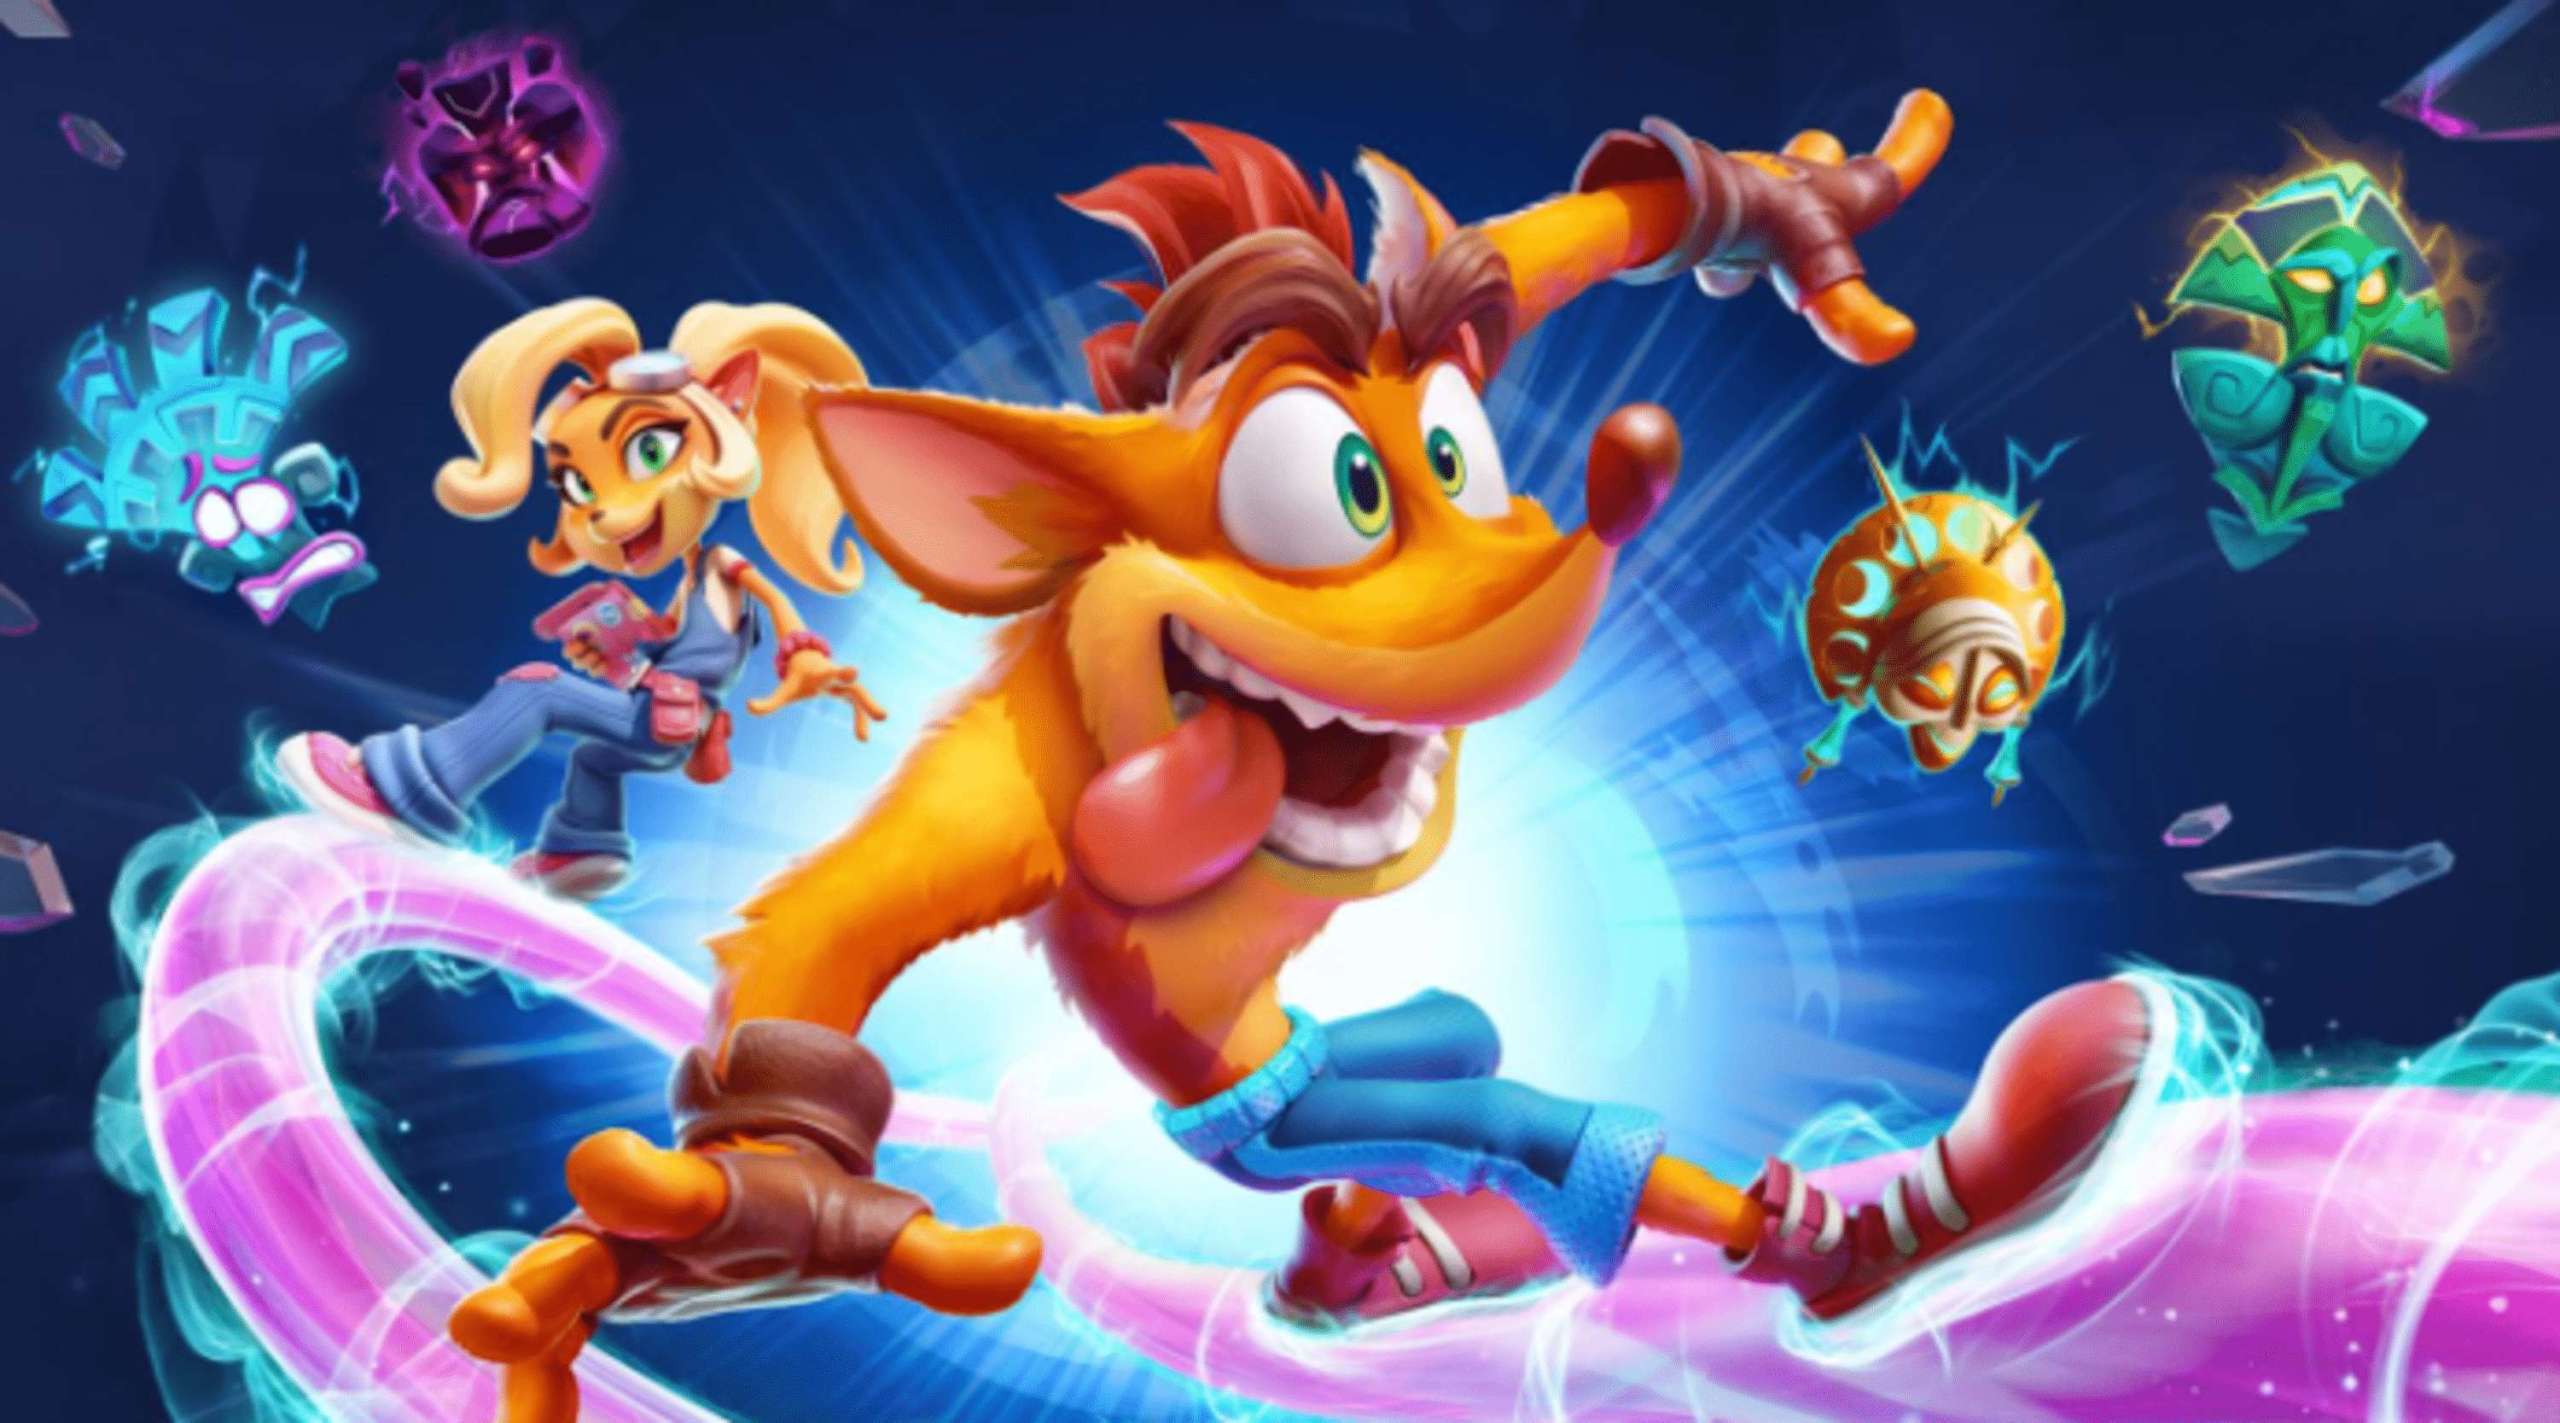 Hr produktion administration The October 18 Steam Release Of Crash Bandicoot 4 Has Been Confirmed |  Happy Gamer